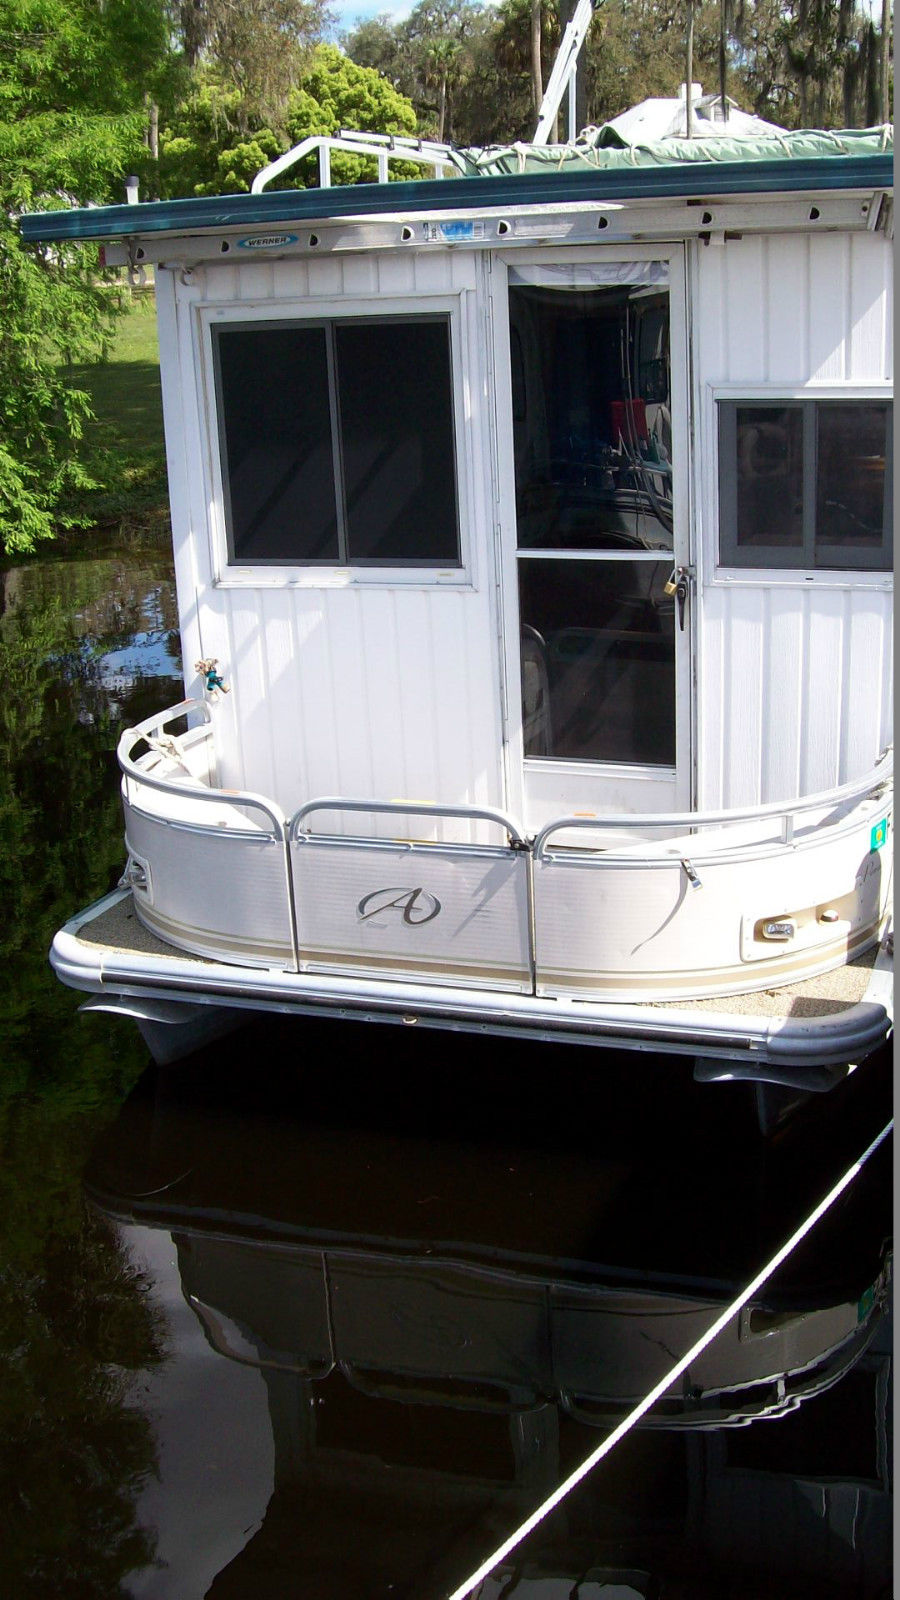 l'il hobo 30' trailerable houseboat - great boat to travel